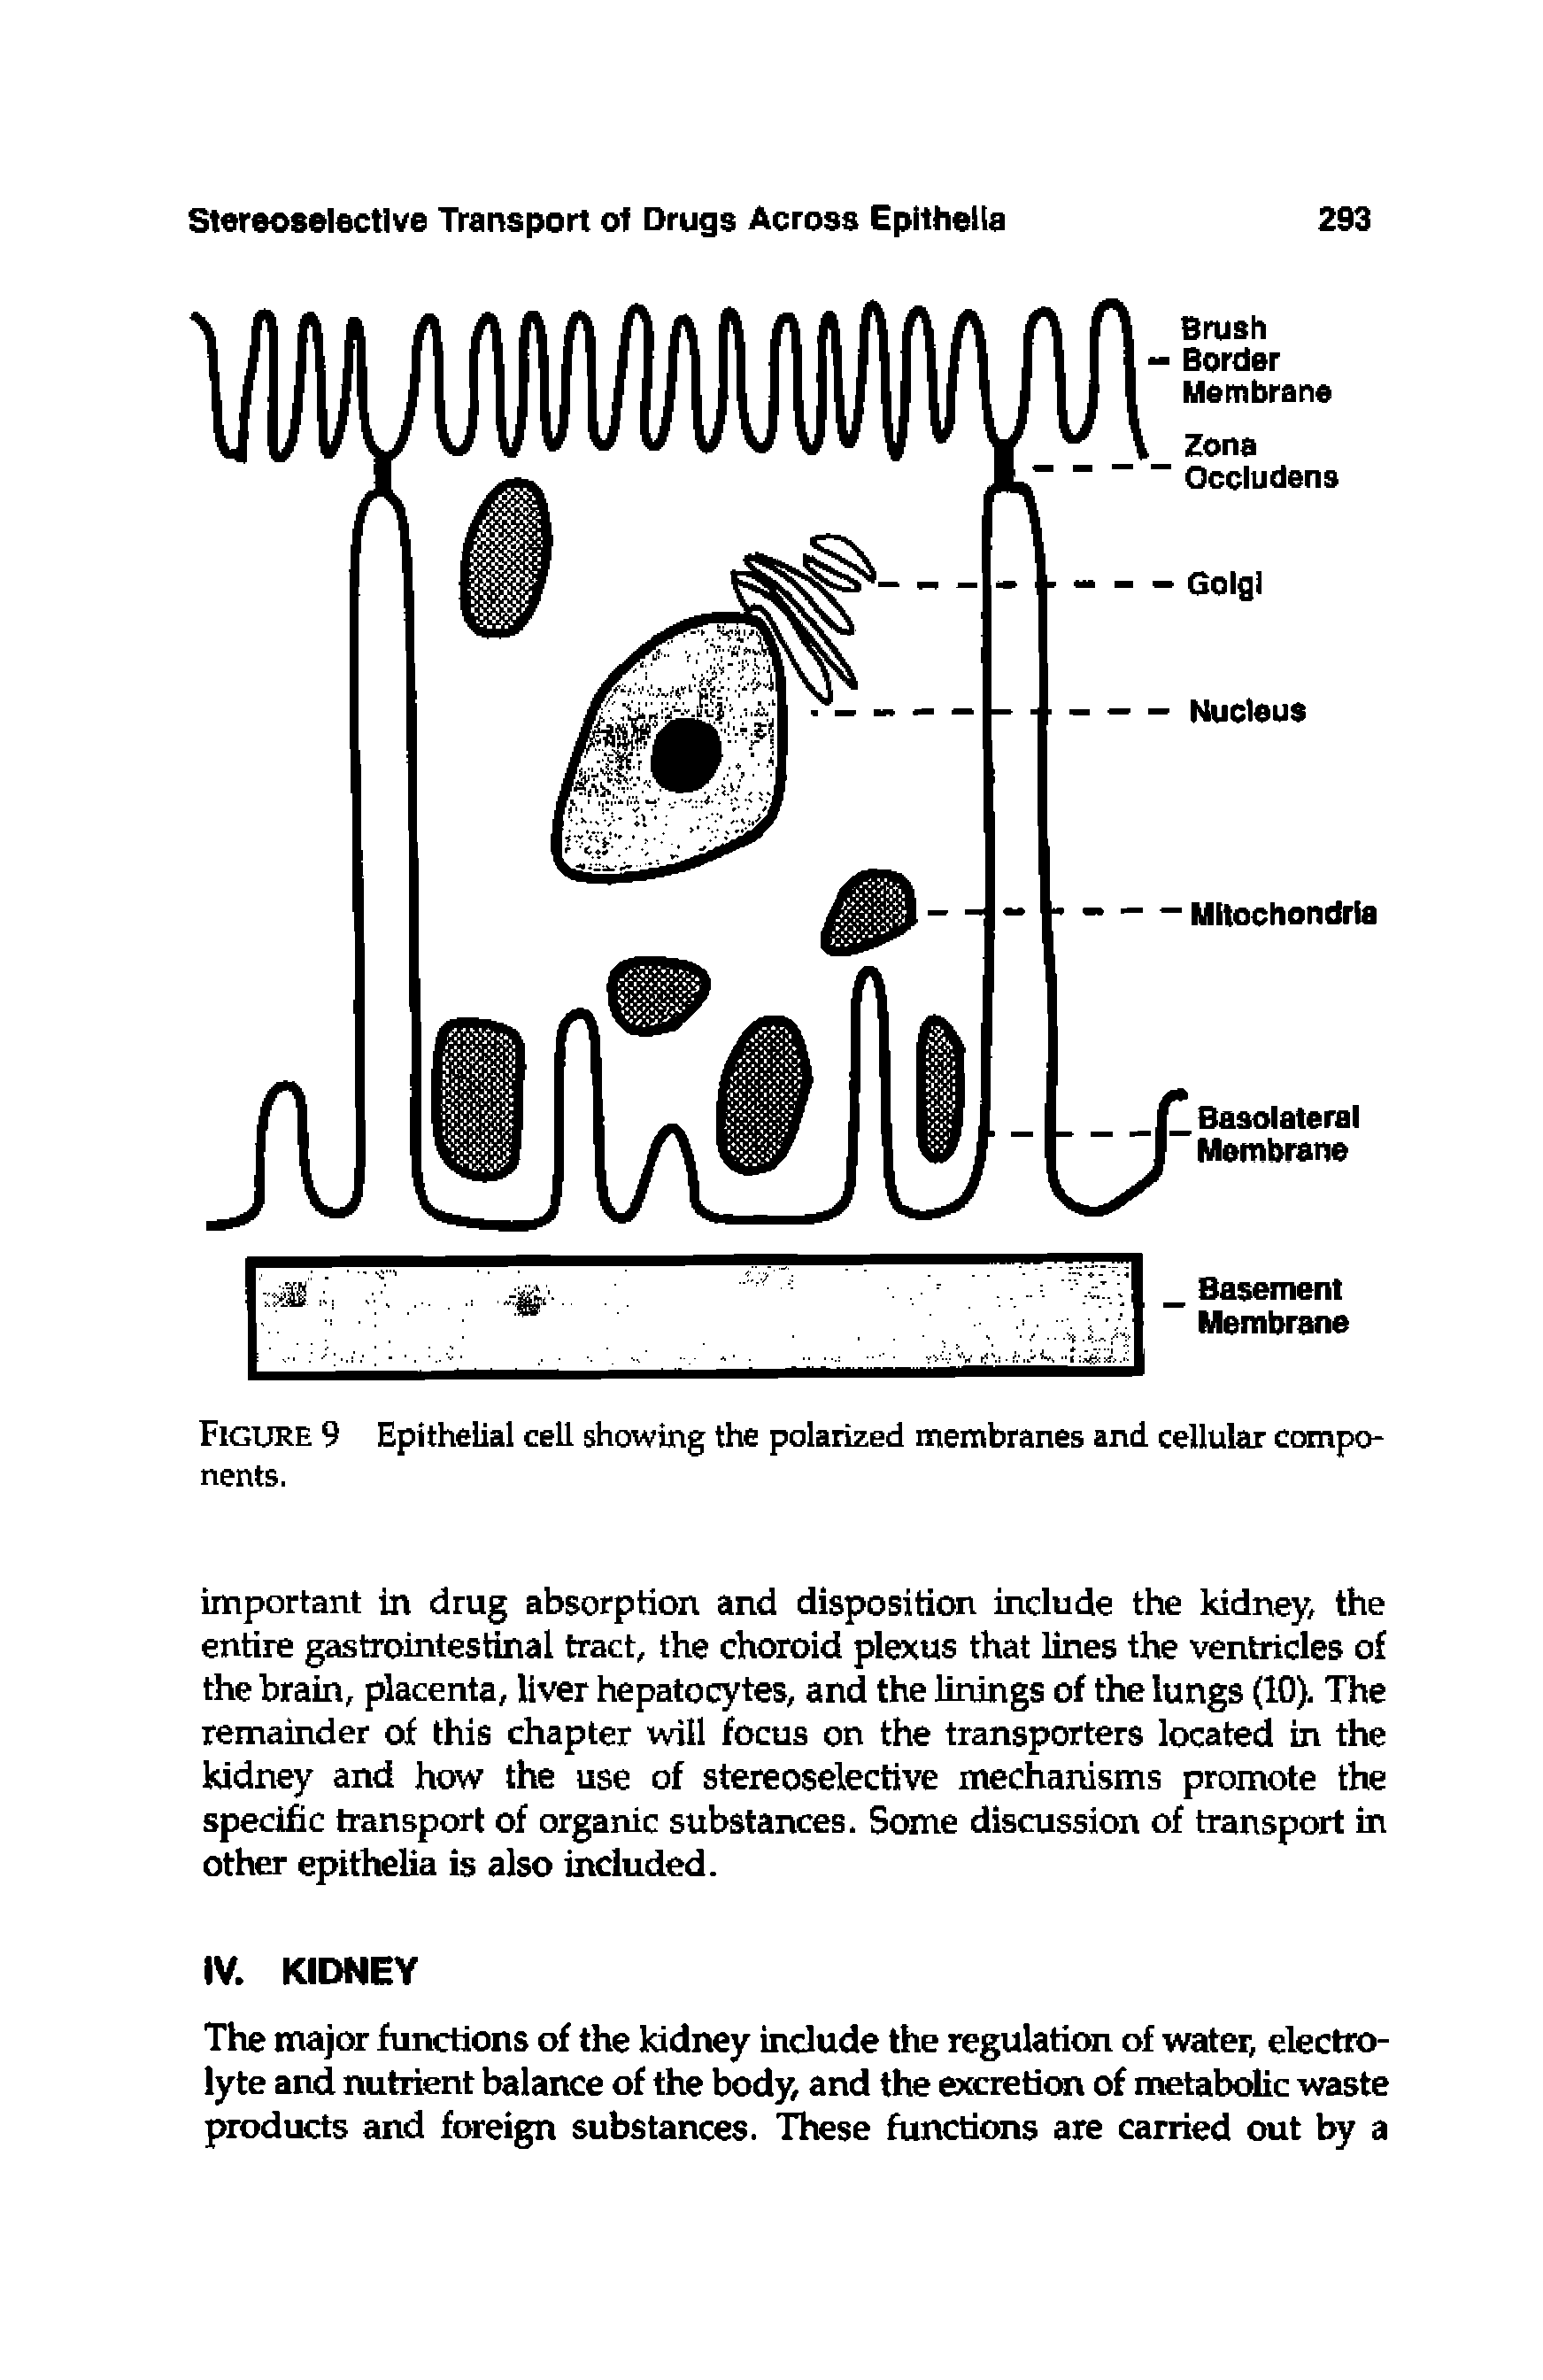 Figure 9 Epithelial cell showing the polarized membranes and cellular components.